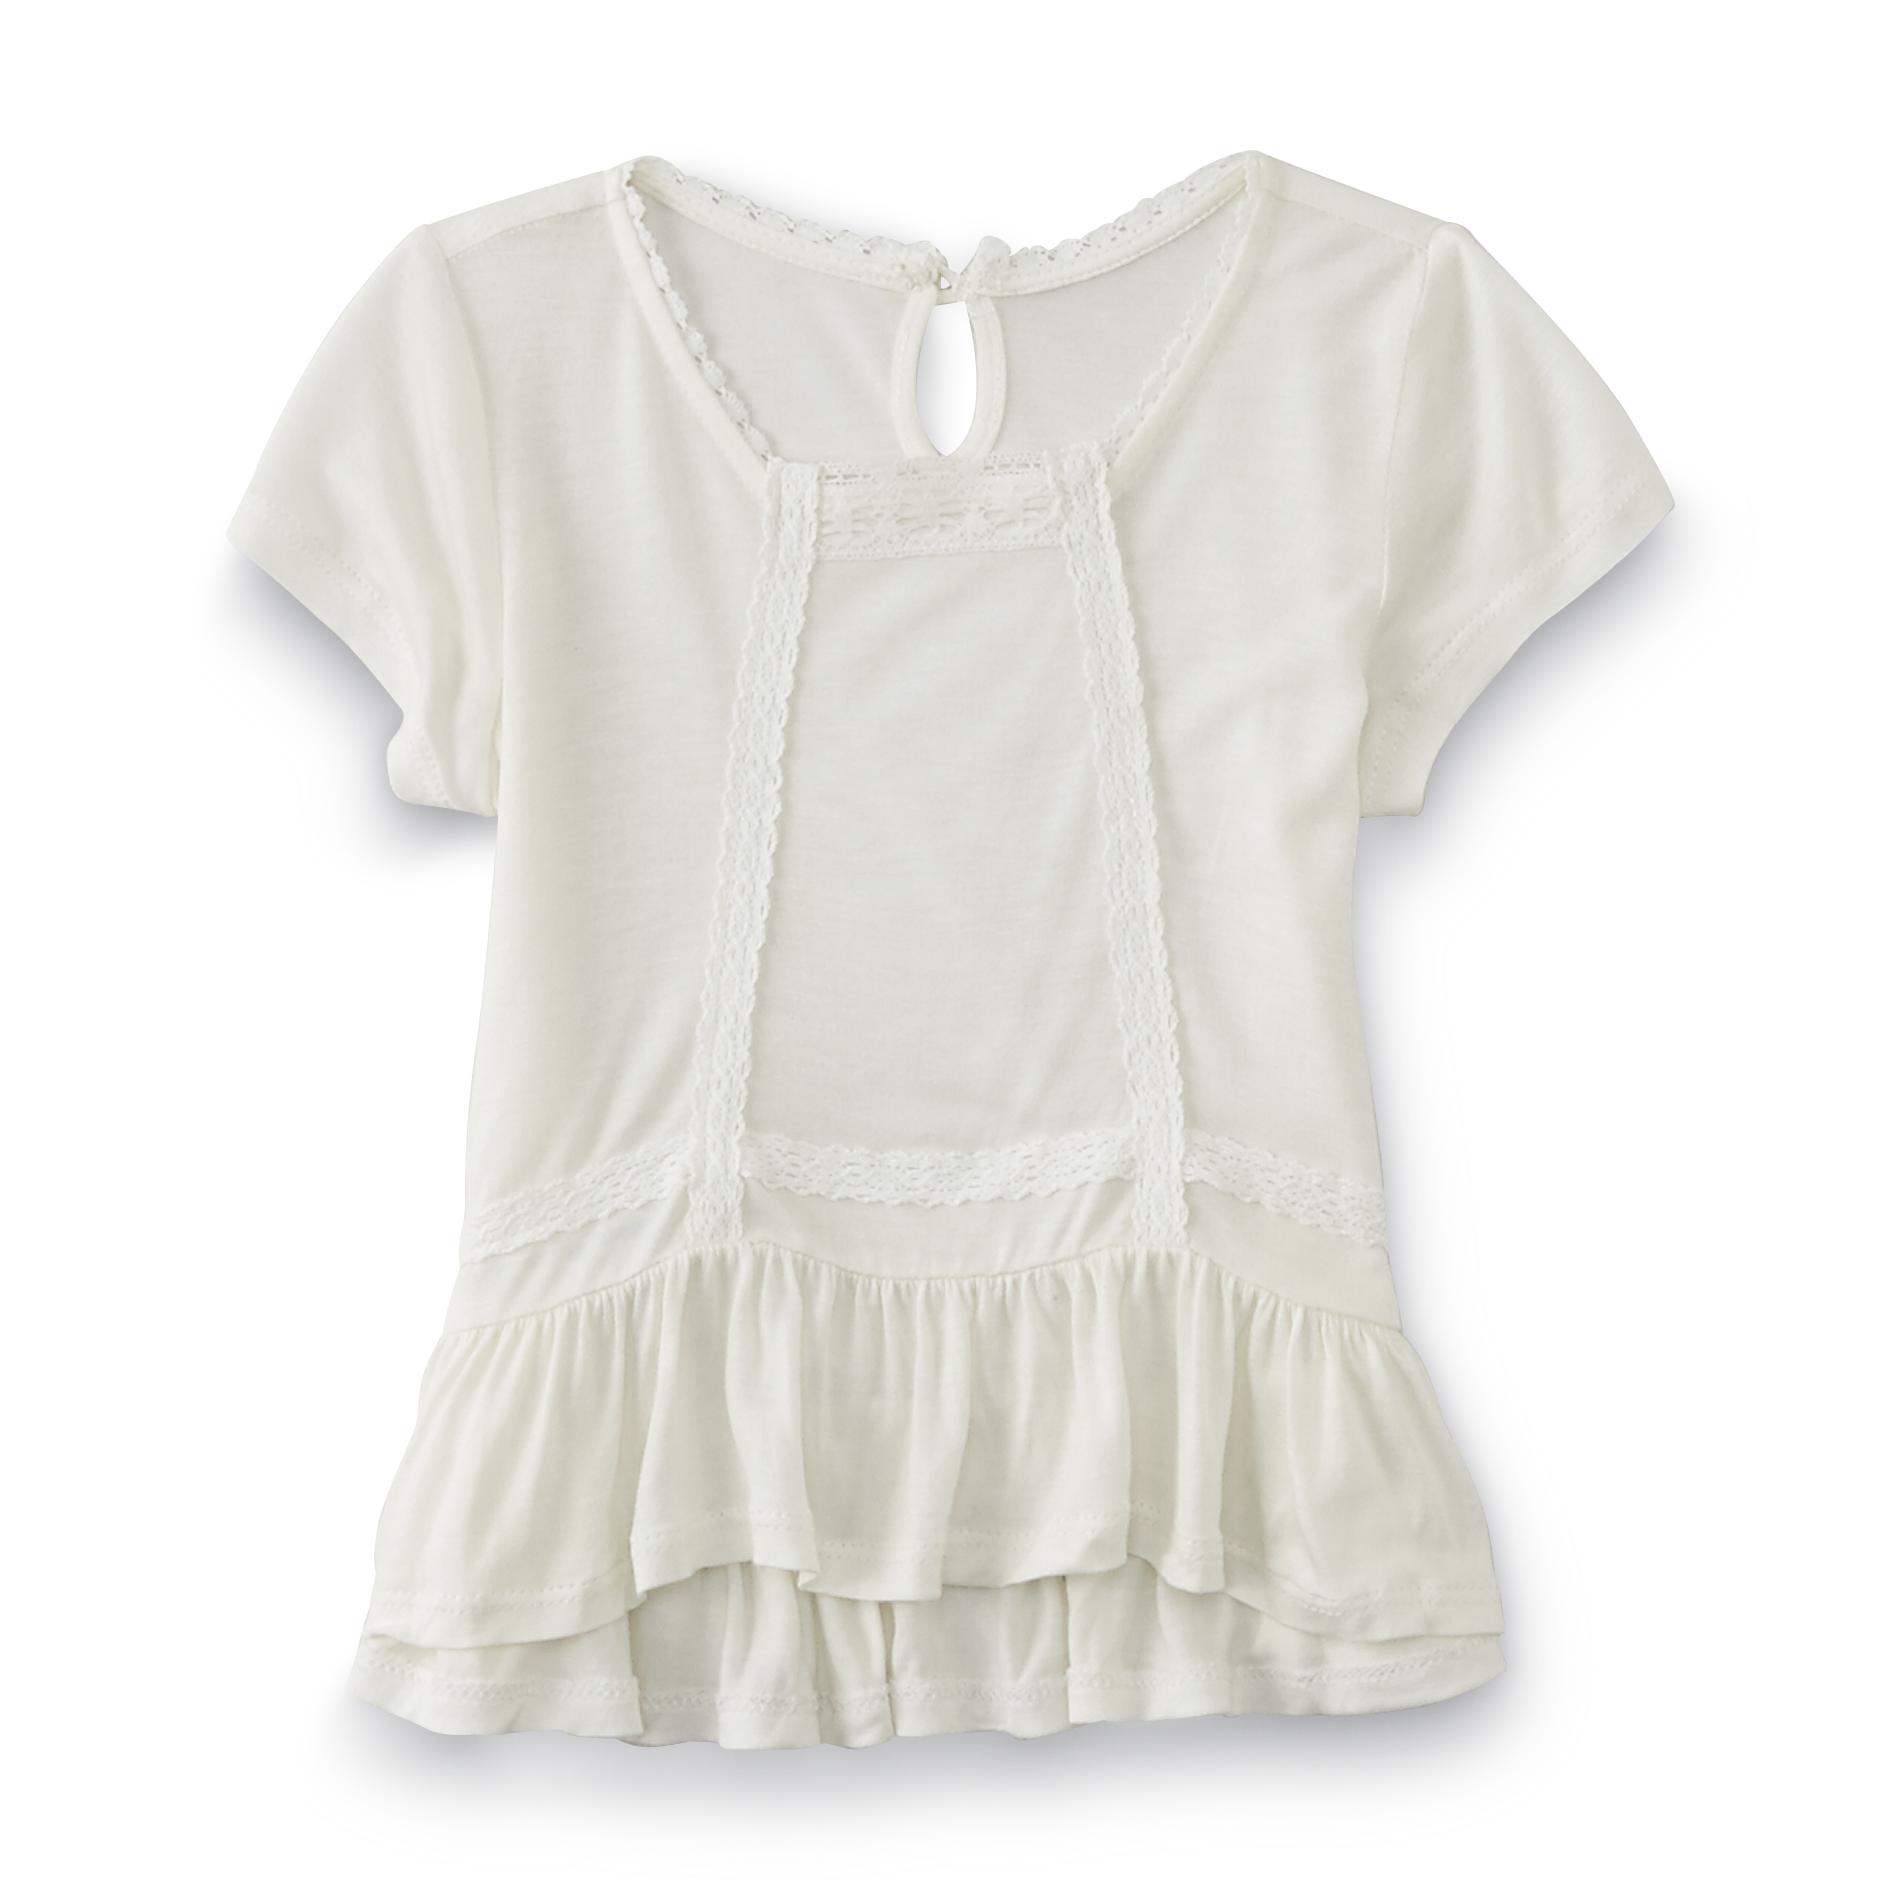 Toughskins Infant & Toddler Girl's Tunic Top - Lace